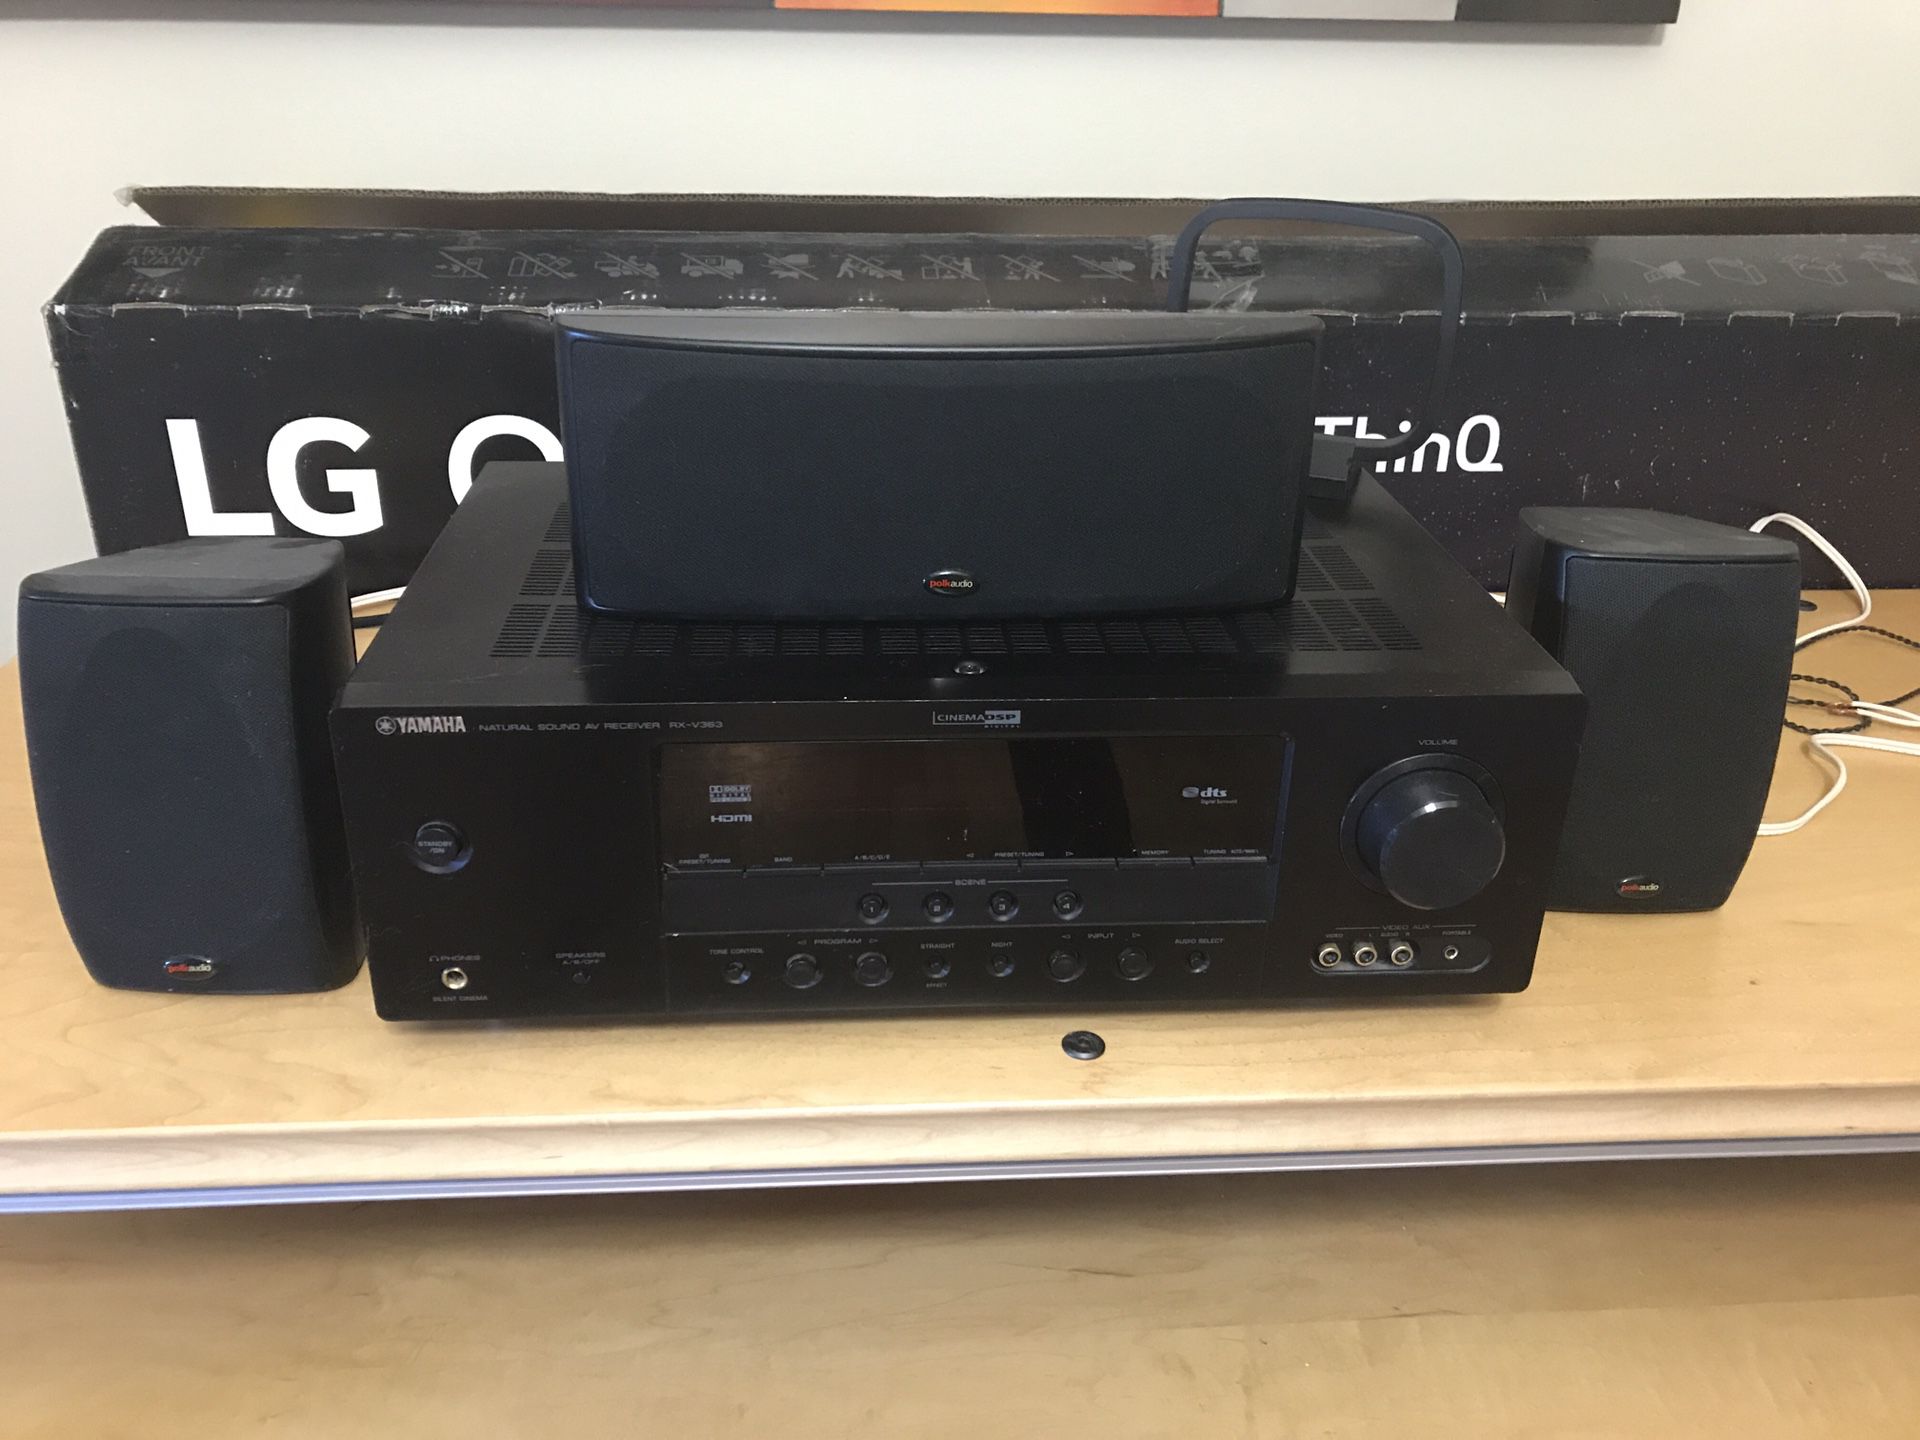 Yamaha 5.1 receiver and 3 speakers